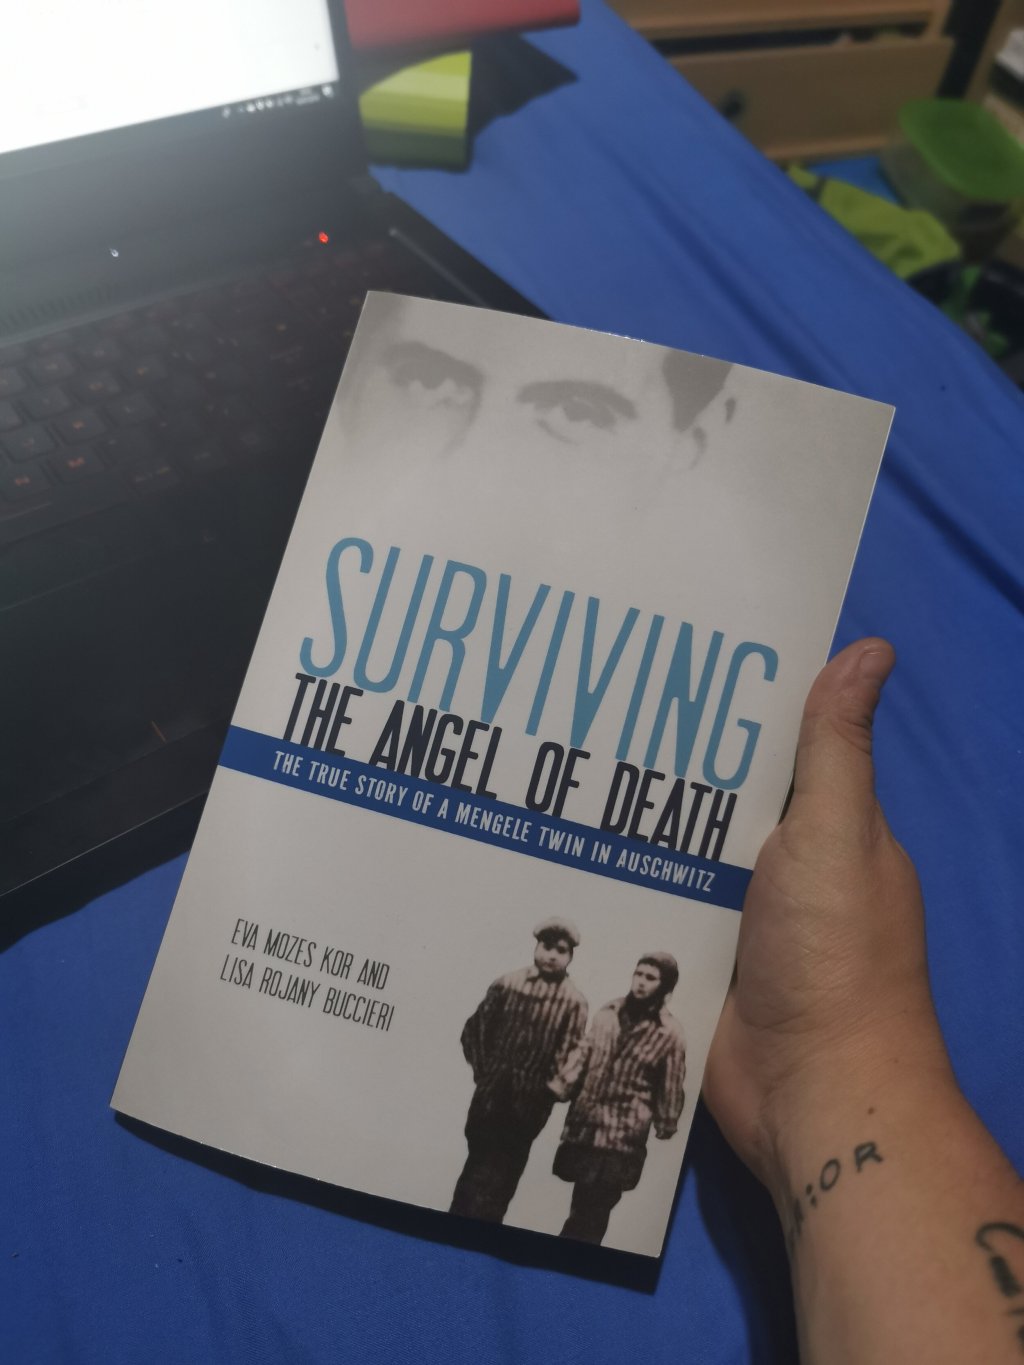 Book Review: Surviving the Angel of Death by Eva Mozes Kor and Lisa Rojany Buccieri